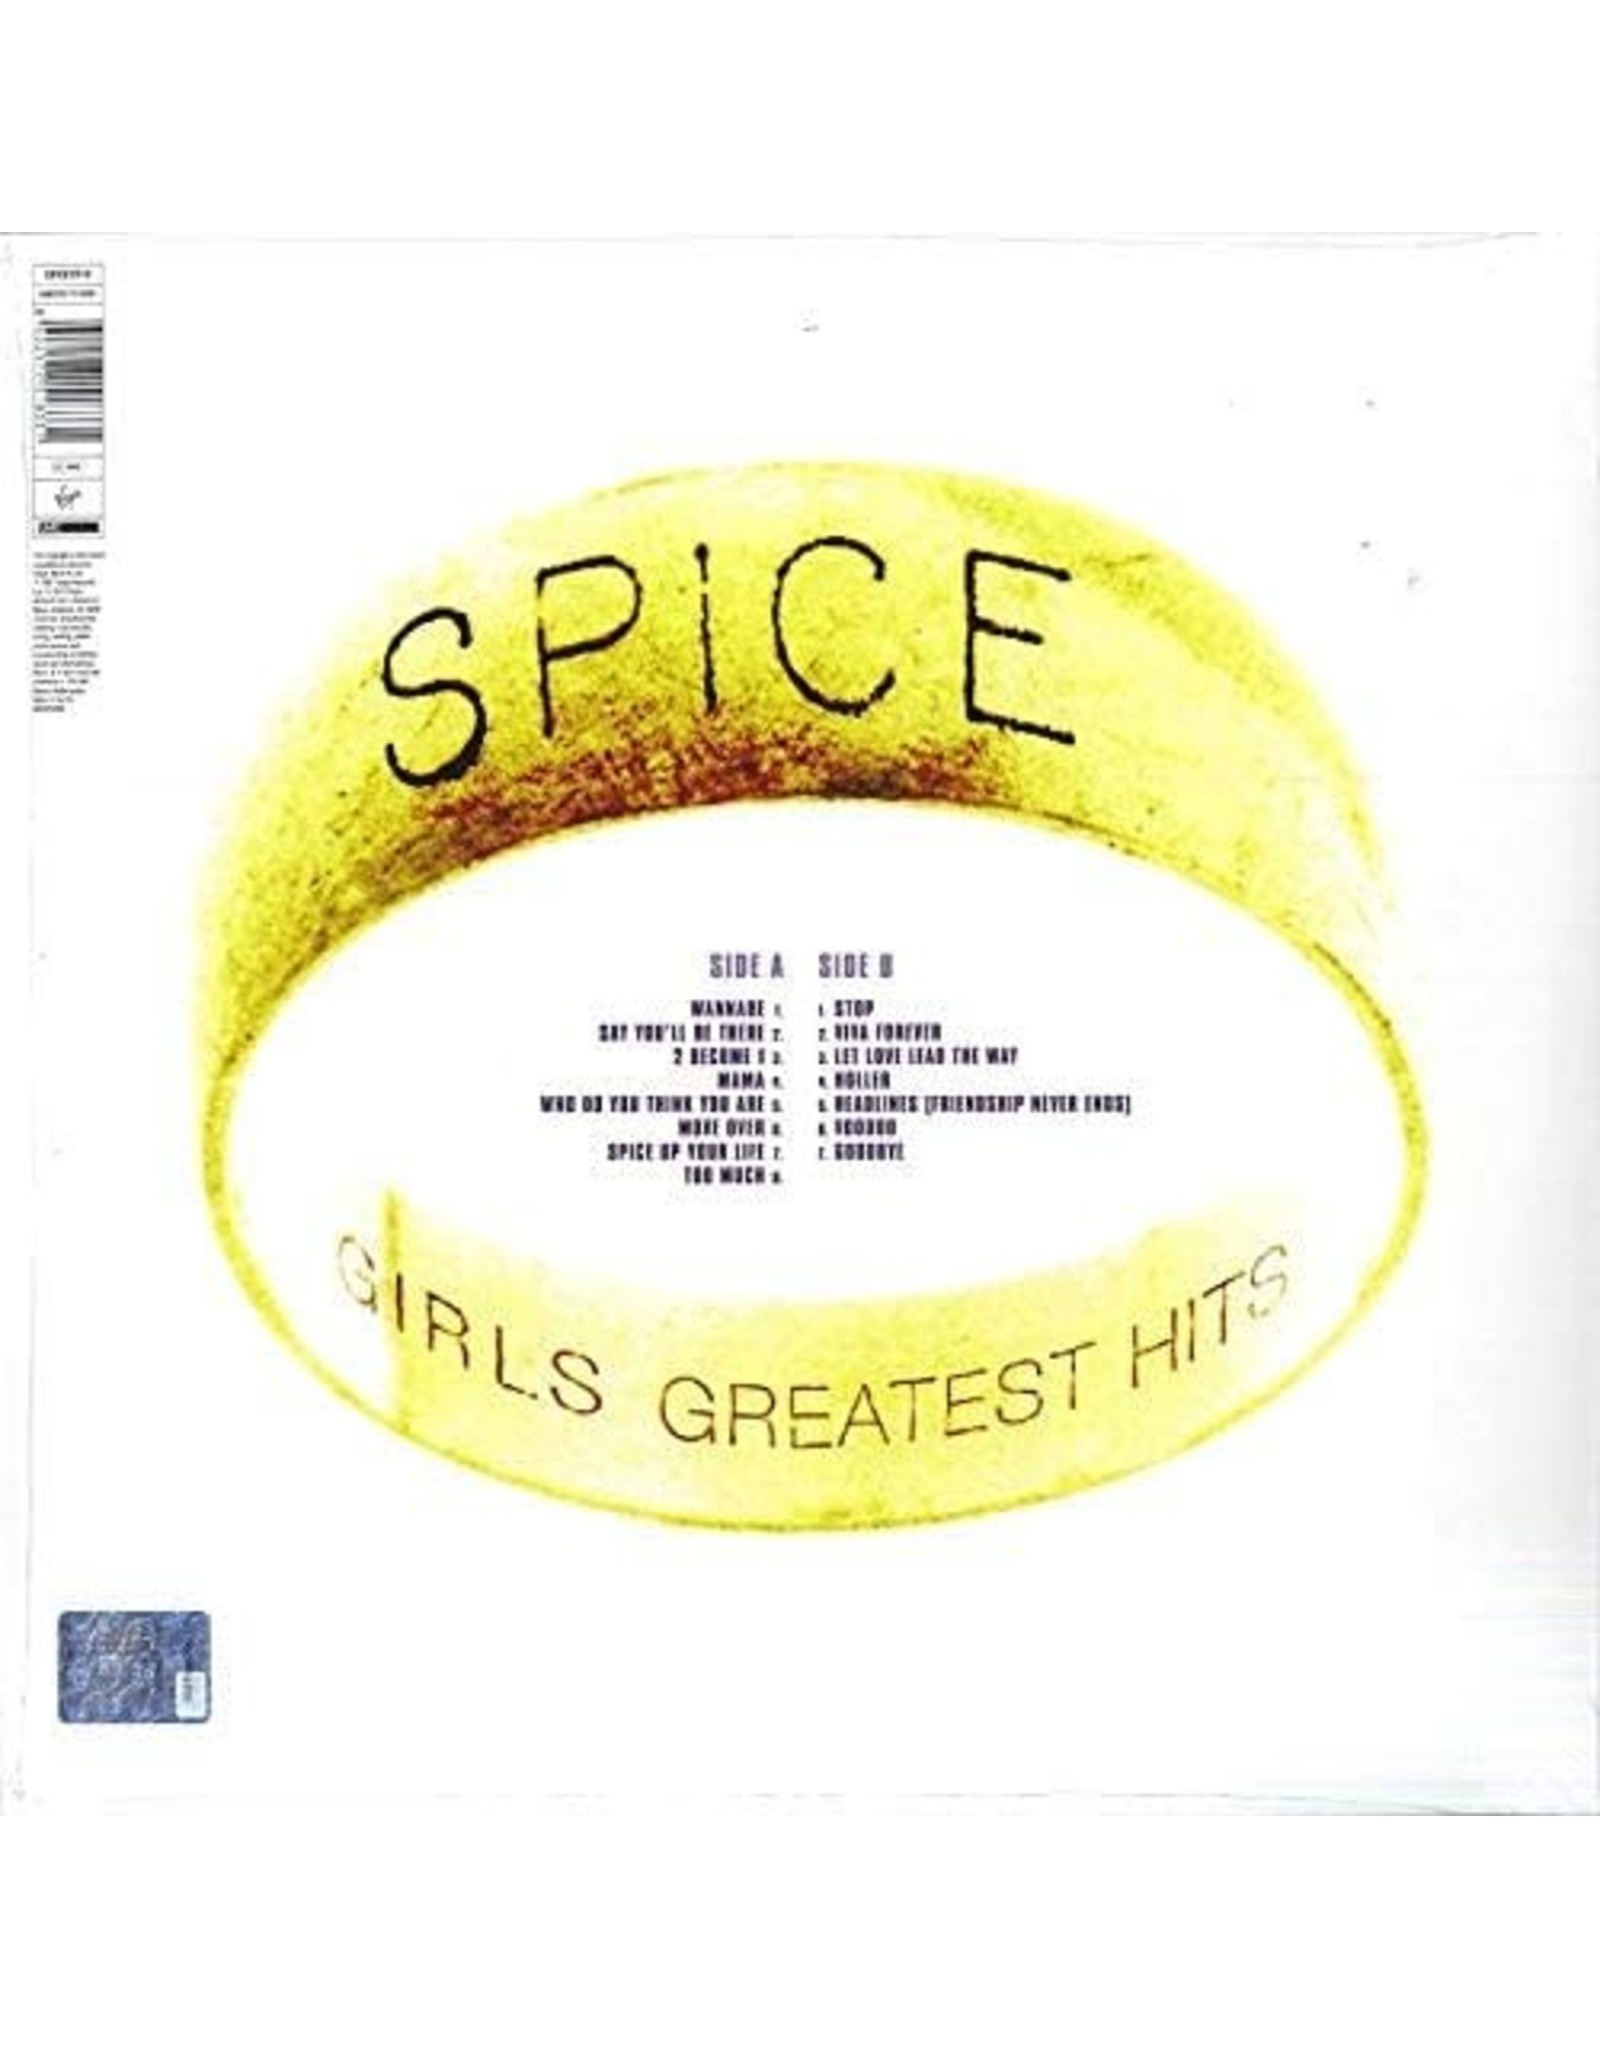 Spice Girls Greatest Hits Picture Disc Vinyl Pop Music 